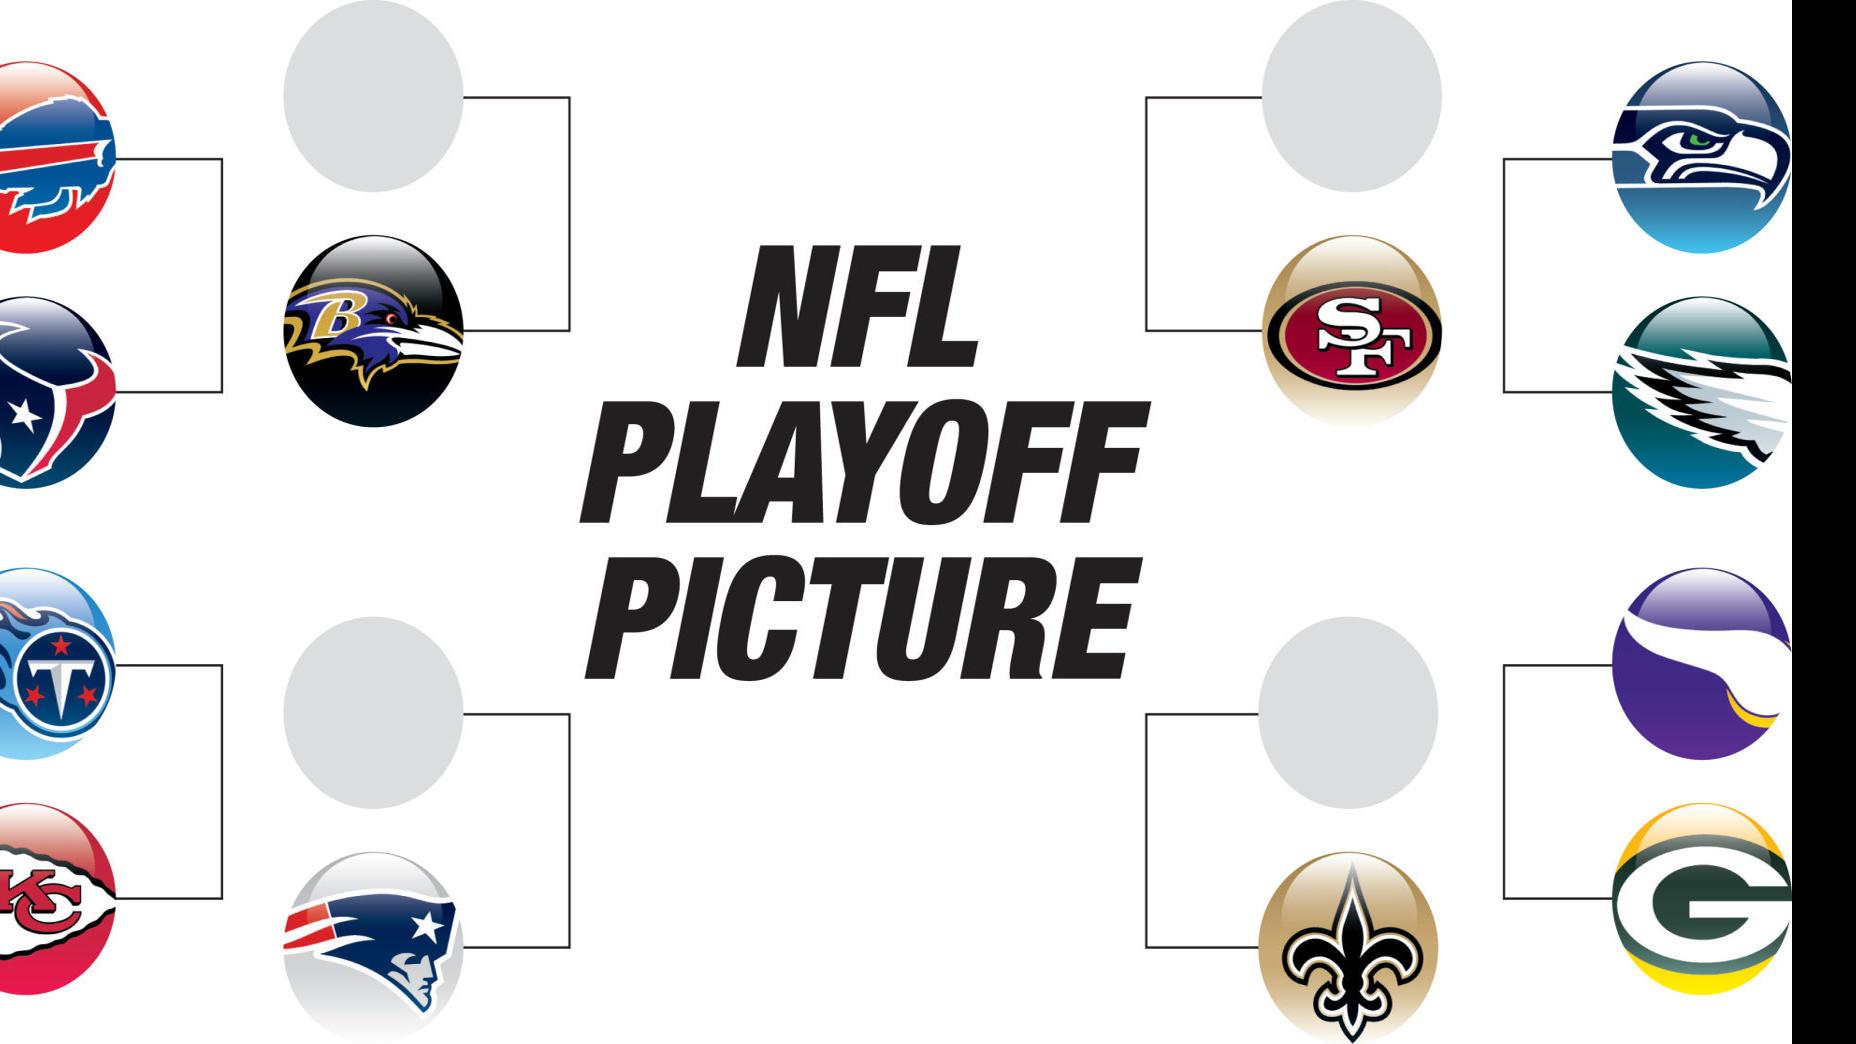 NFL playoff bracket, matchups and schedule - The Washington Post